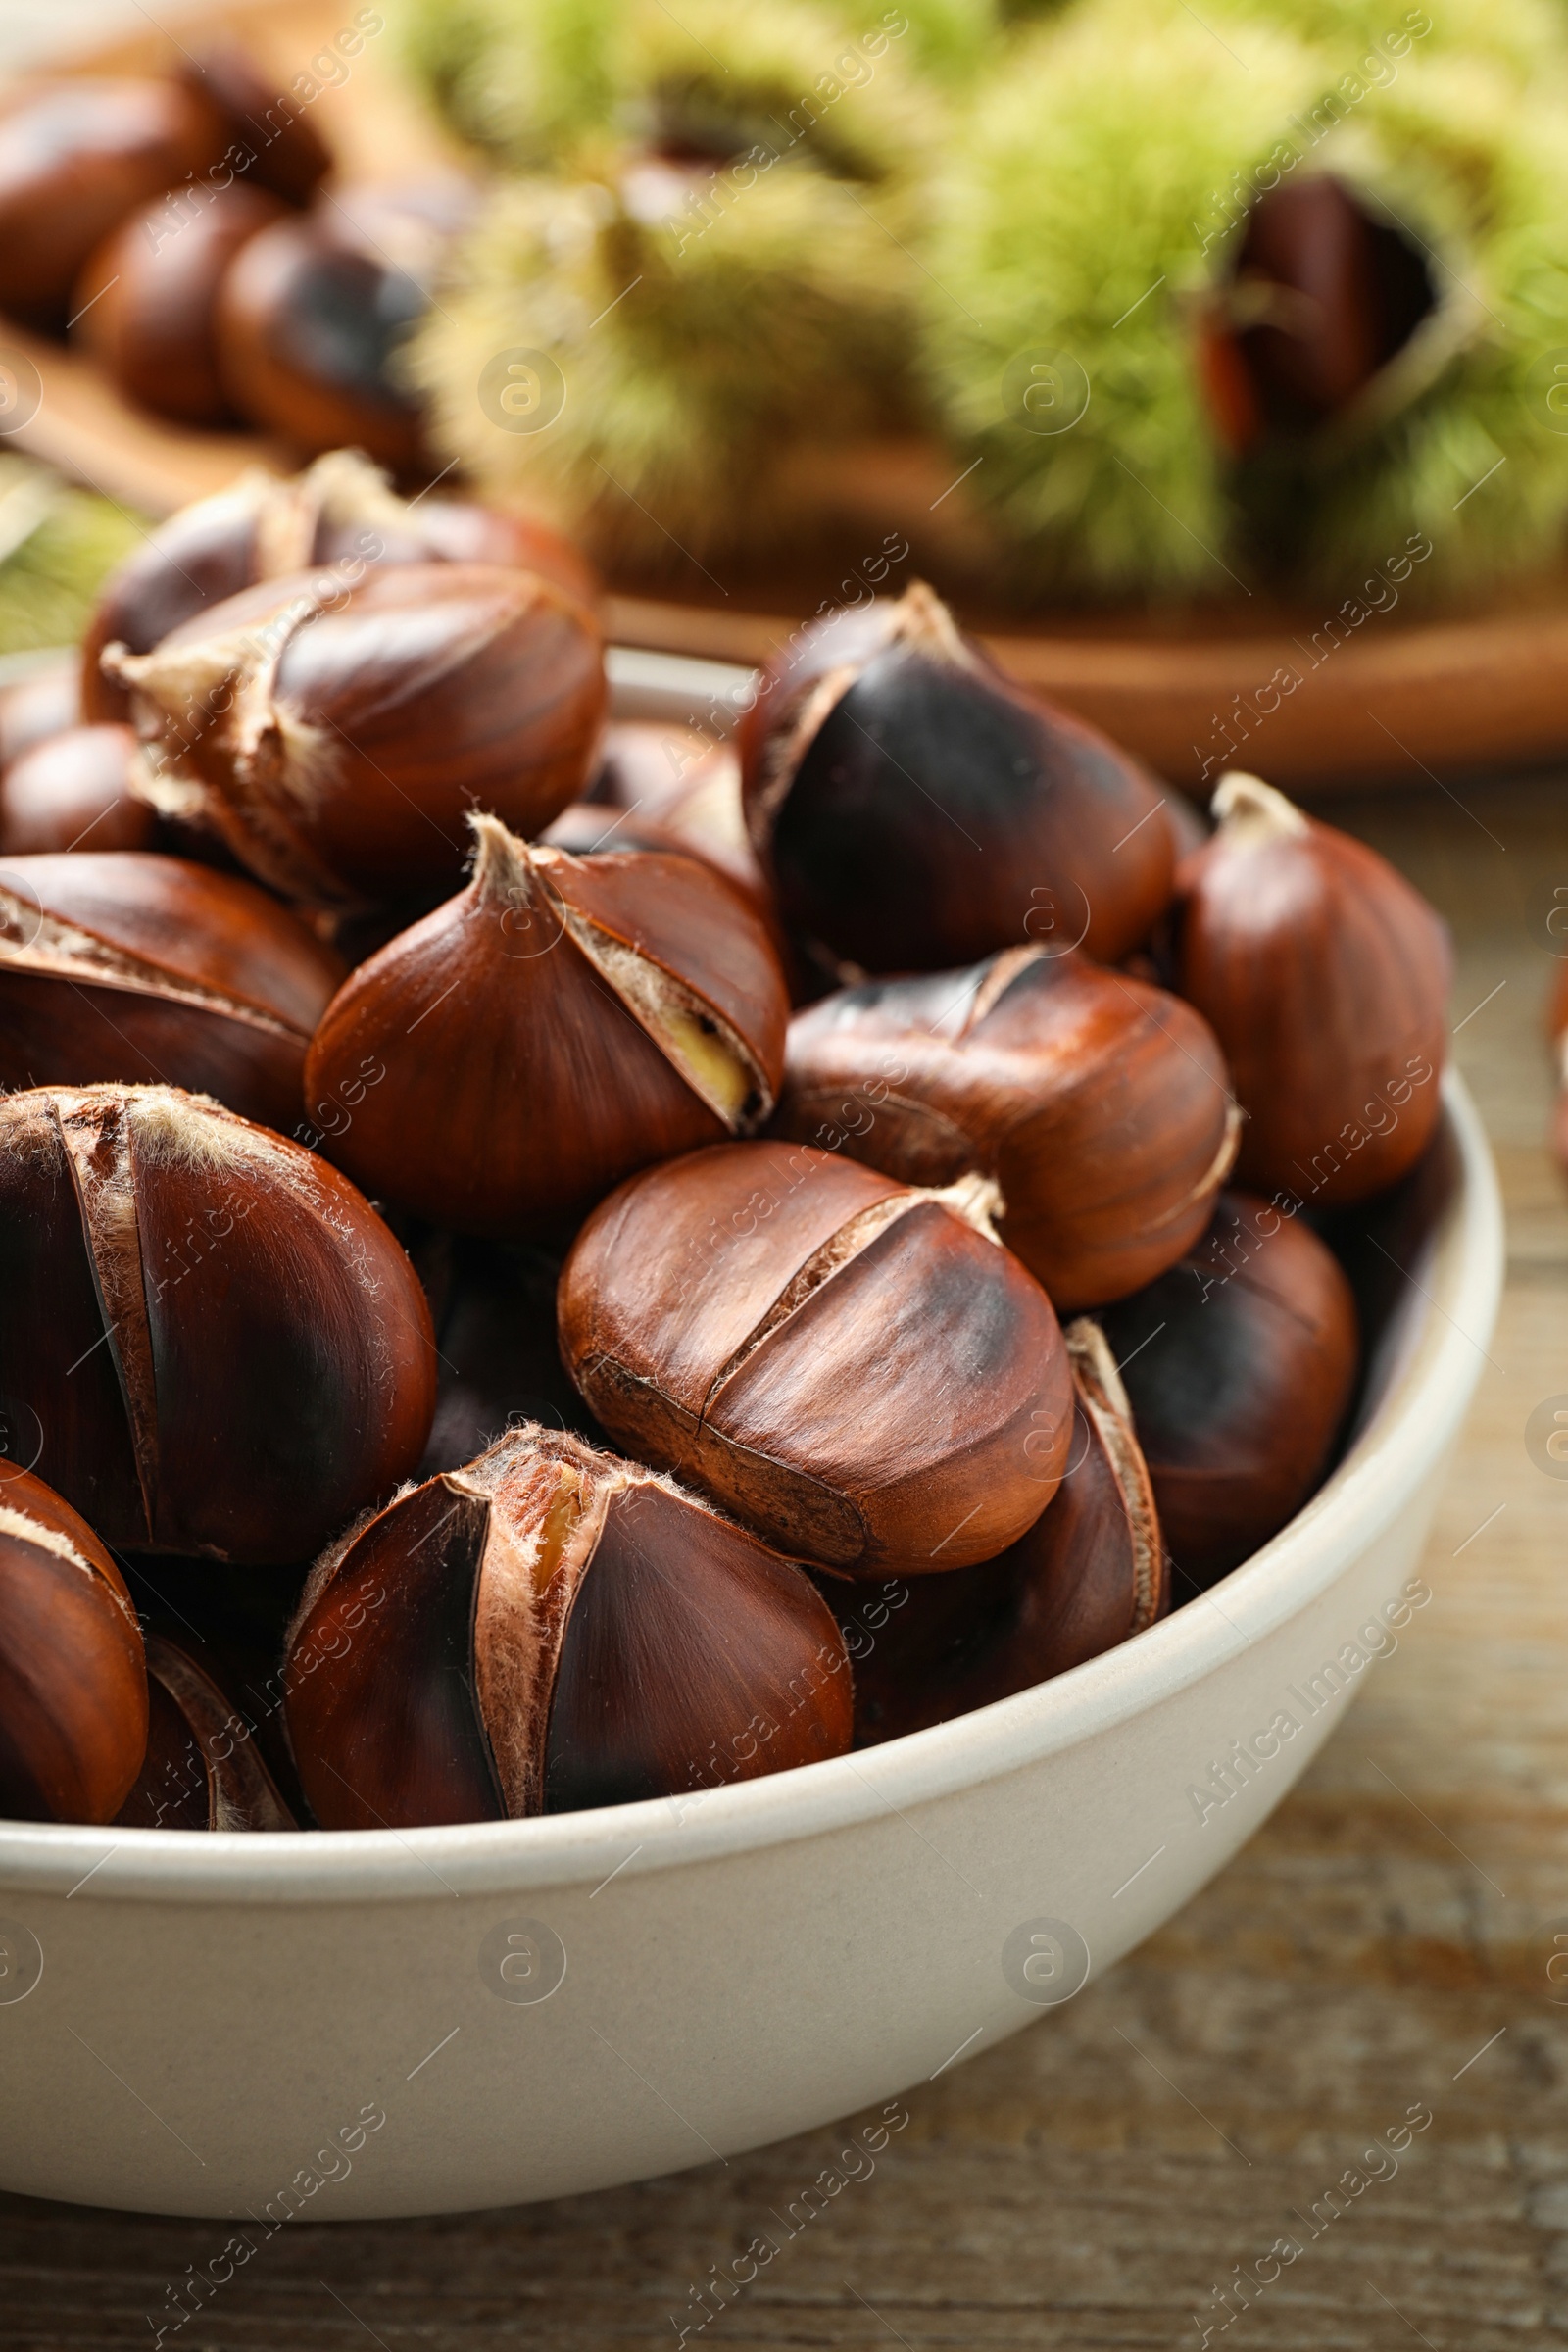 Photo of Delicious roasted edible chestnuts in bowl on wooden table, closeup